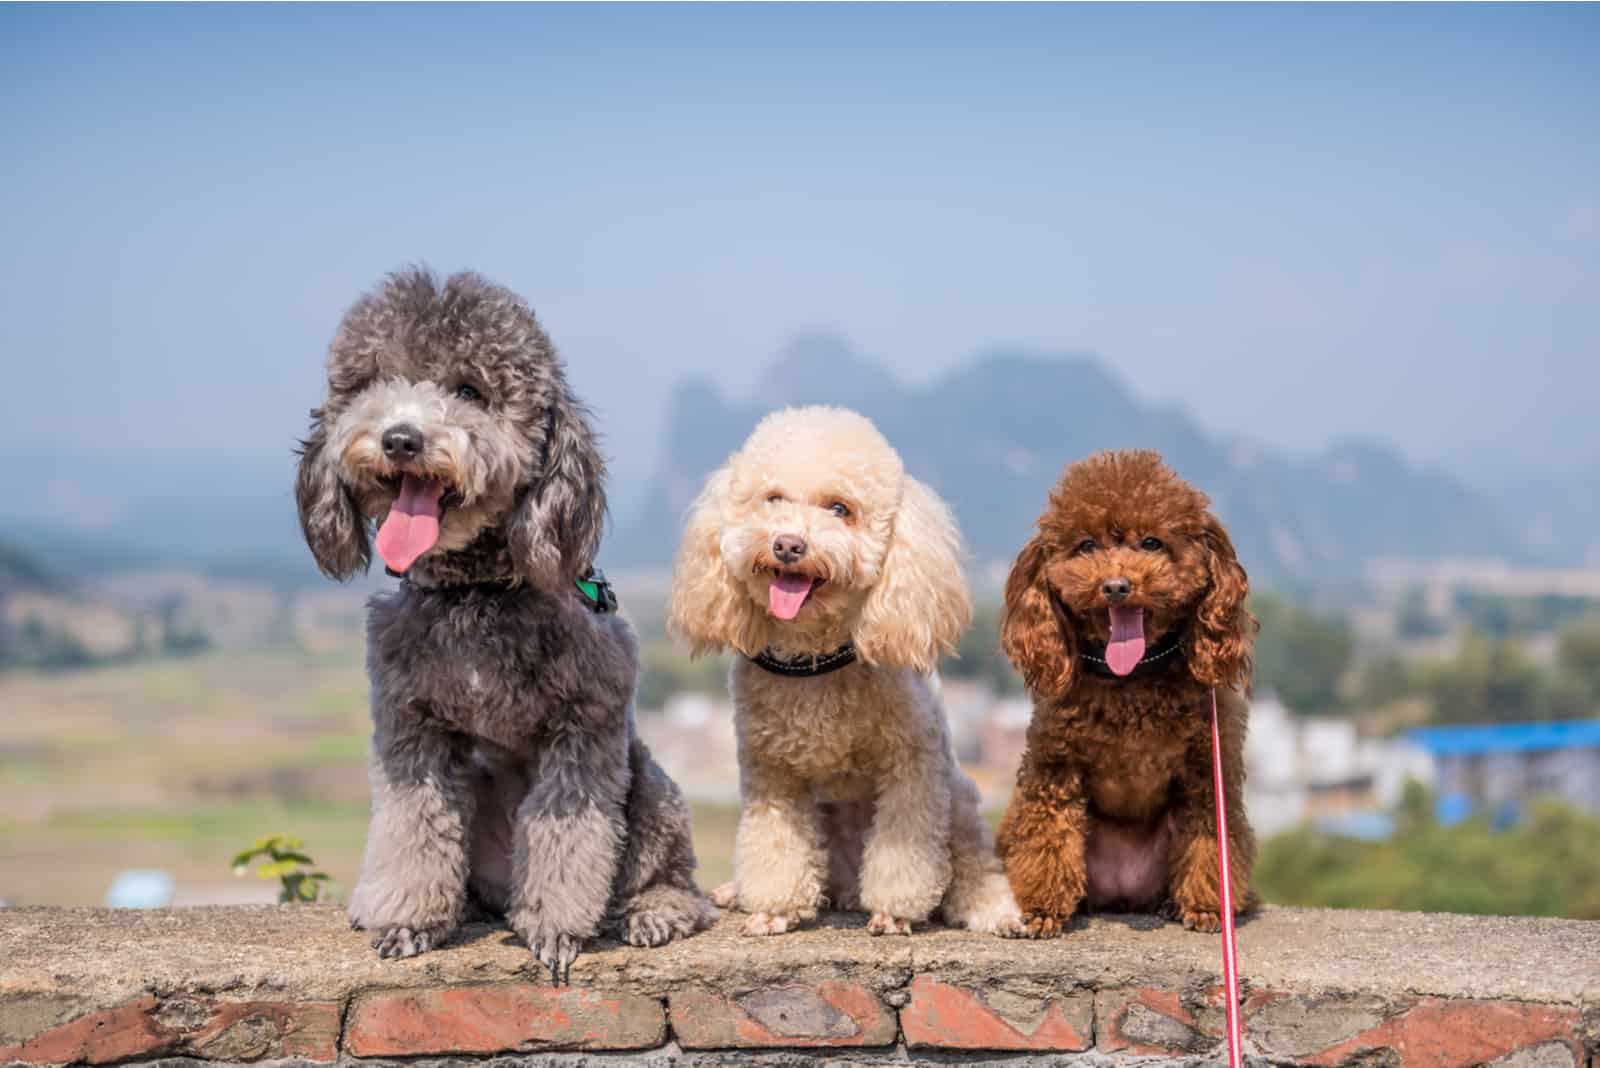 Three poodles sitting side-by-side